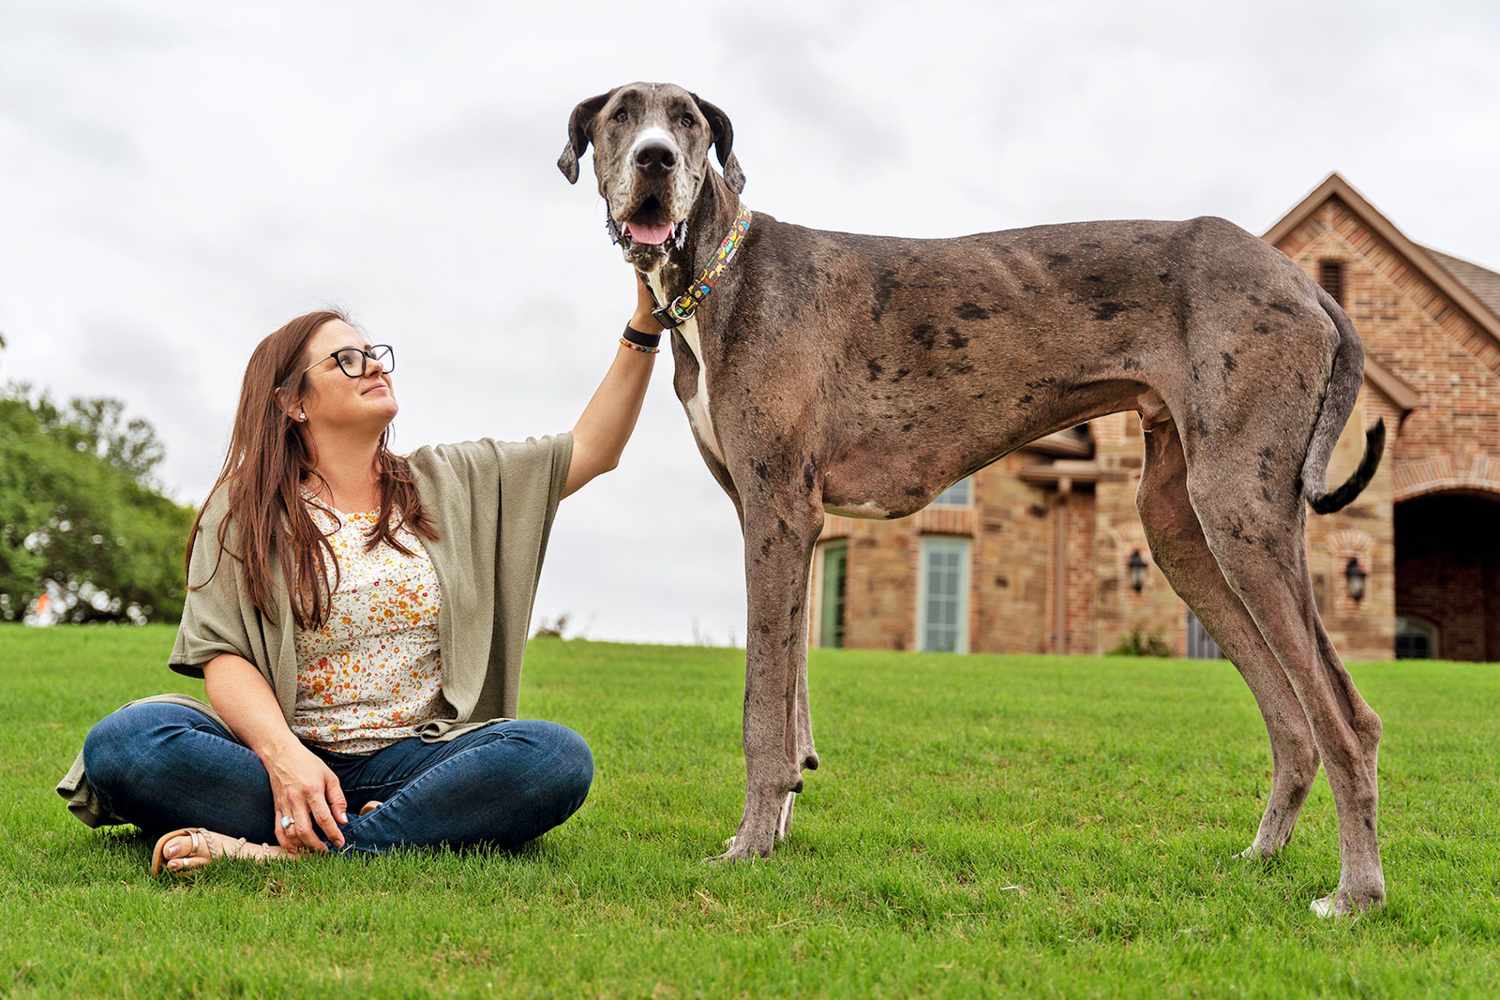 Zeus, a Texas Great Dane, Named World's Tallest Living Dog by Guinness World Records | Daily Paws